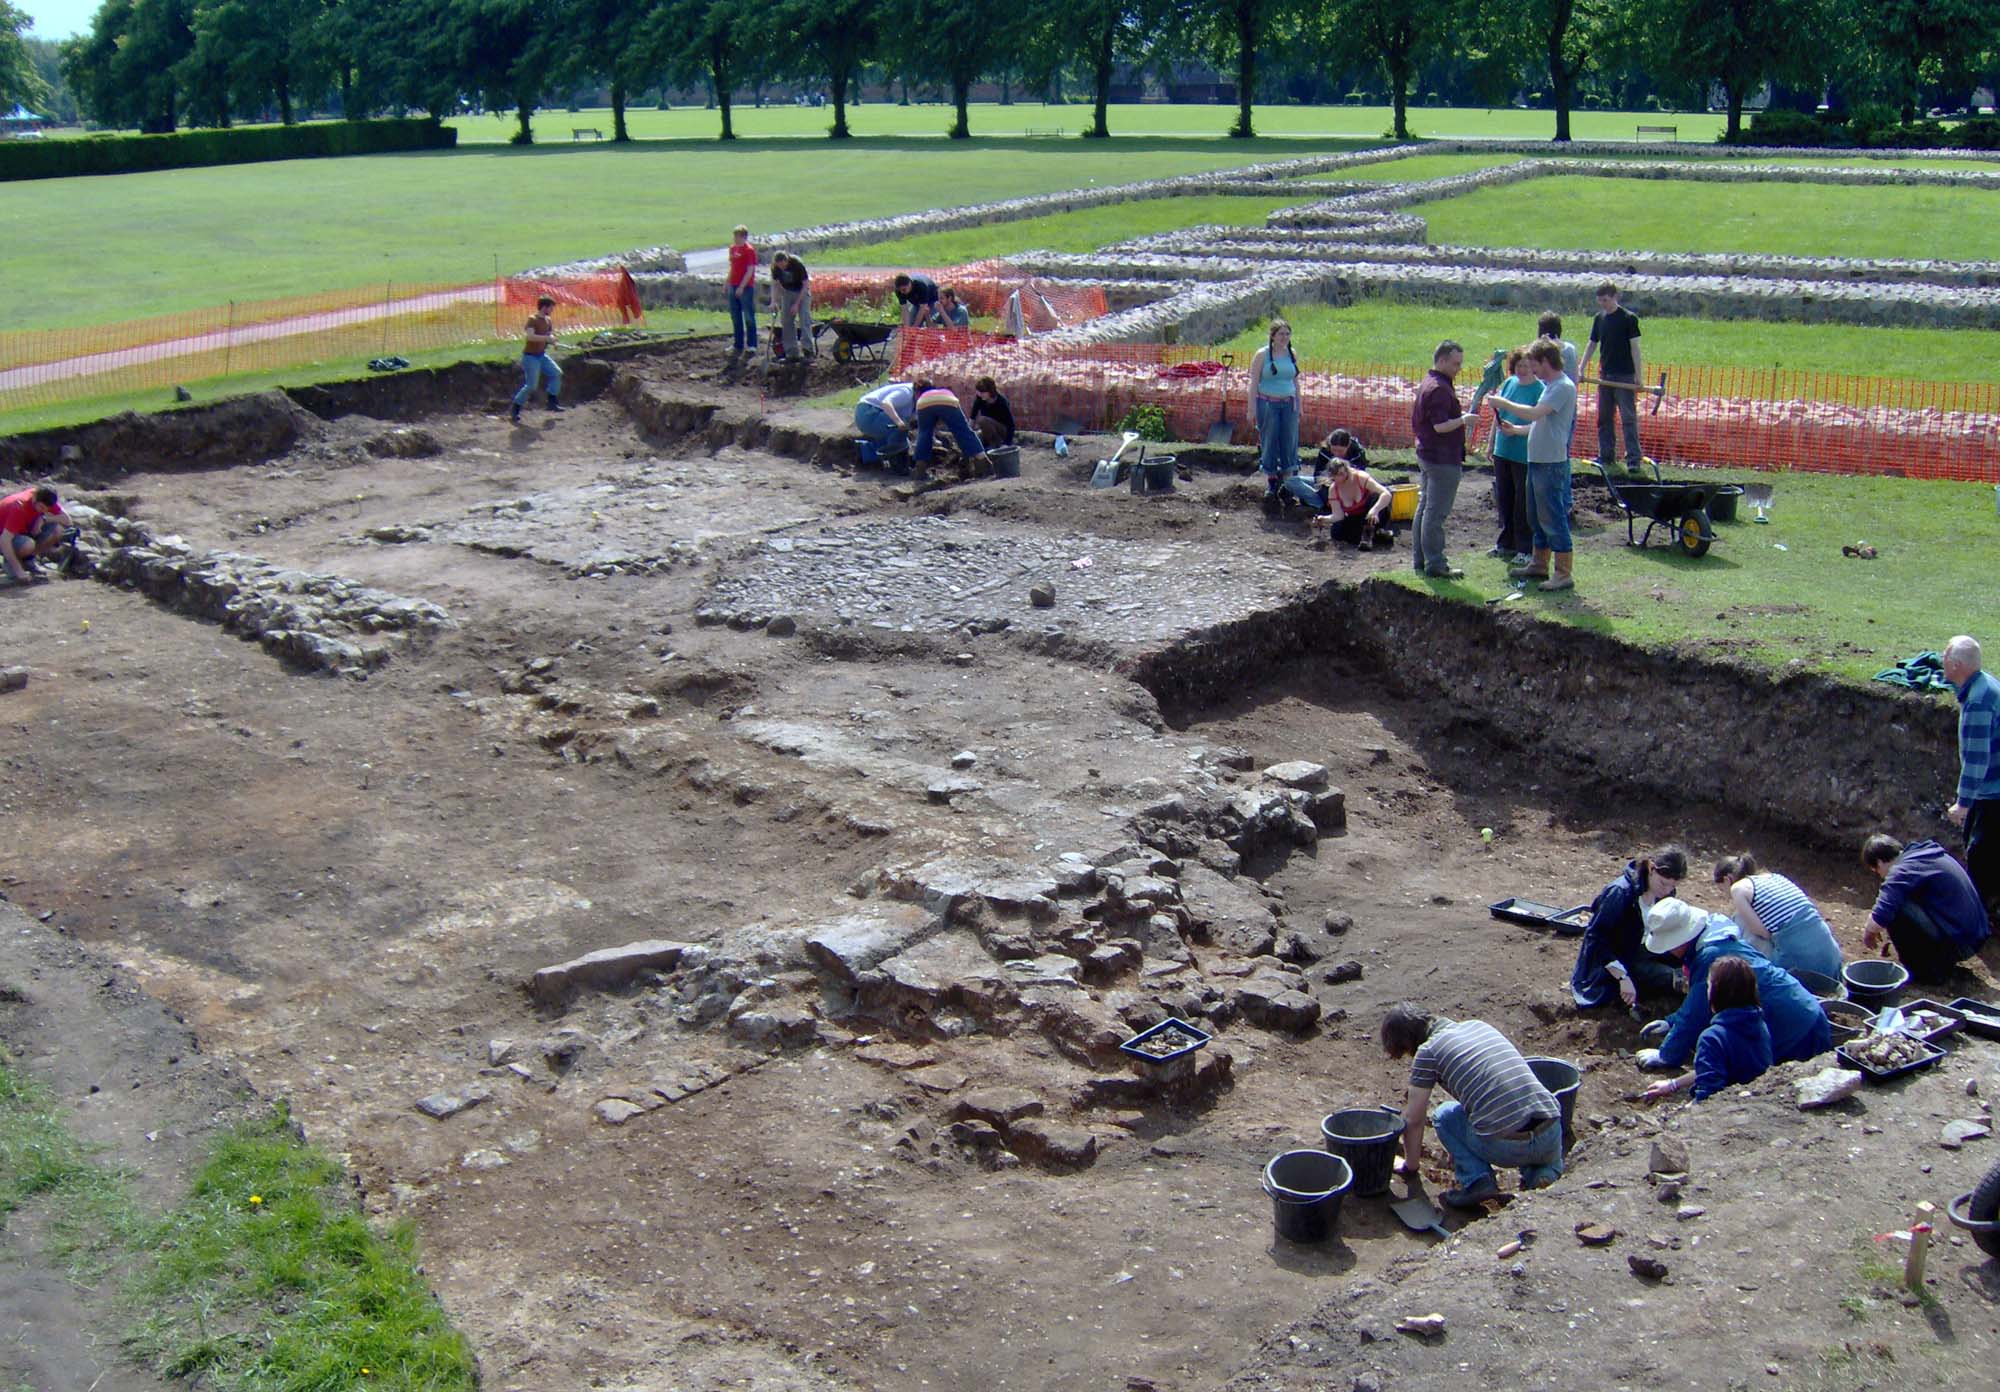 The University of Leicester carried out extensive archaeological excavations at the site of Leicester Abbey between 2000 and 2009 - University of Leicester Archaeological Services